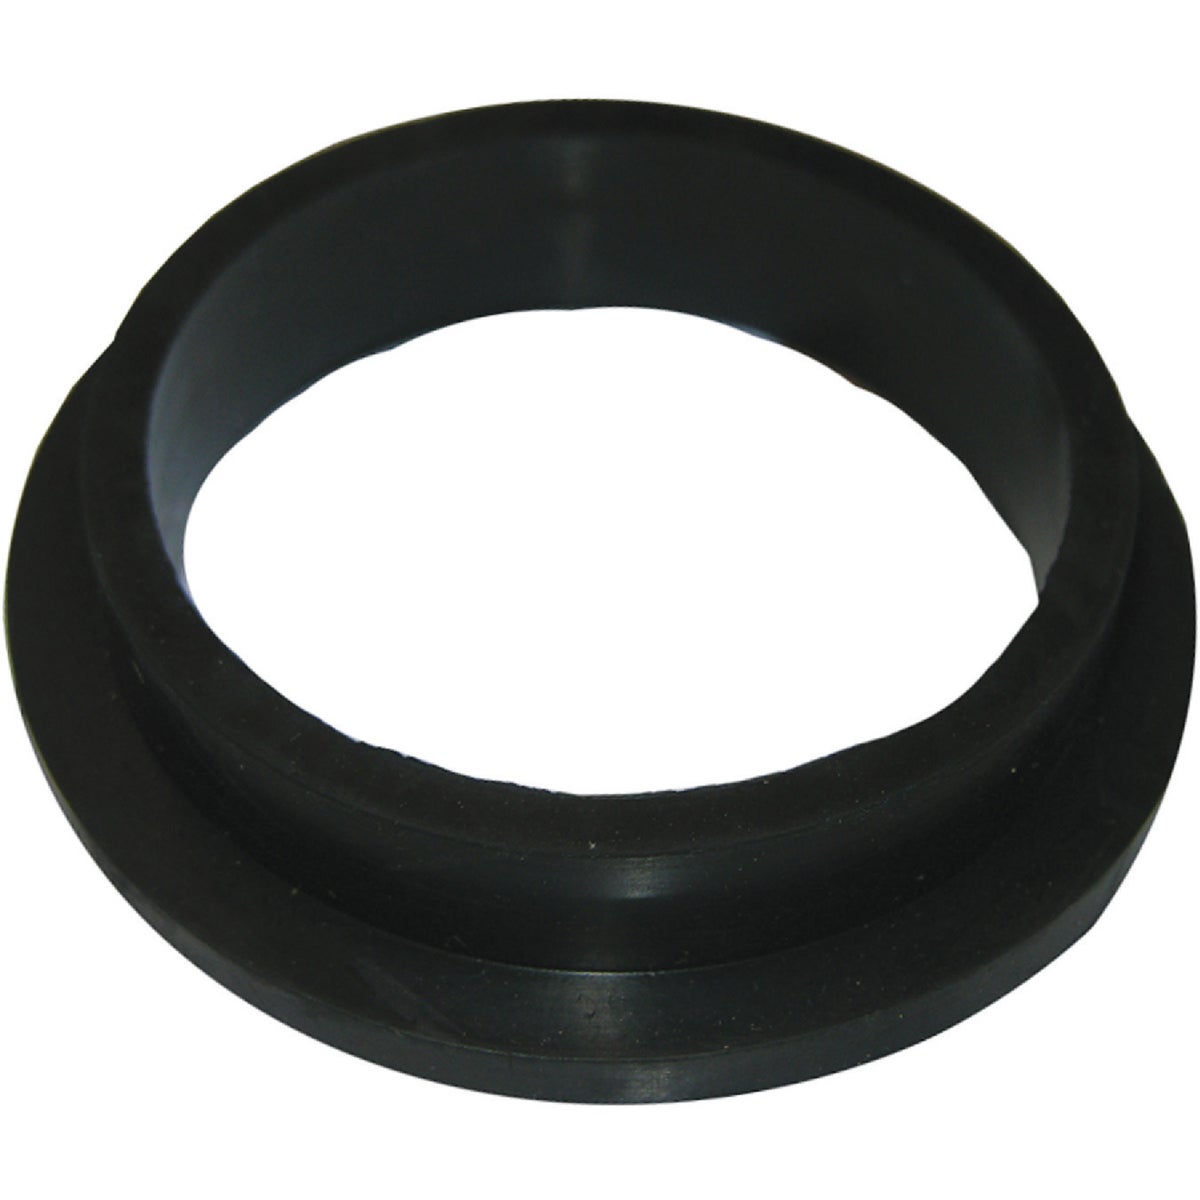 Lasco 2 In. Black Rubber Toilet Spud Flanged Washer 